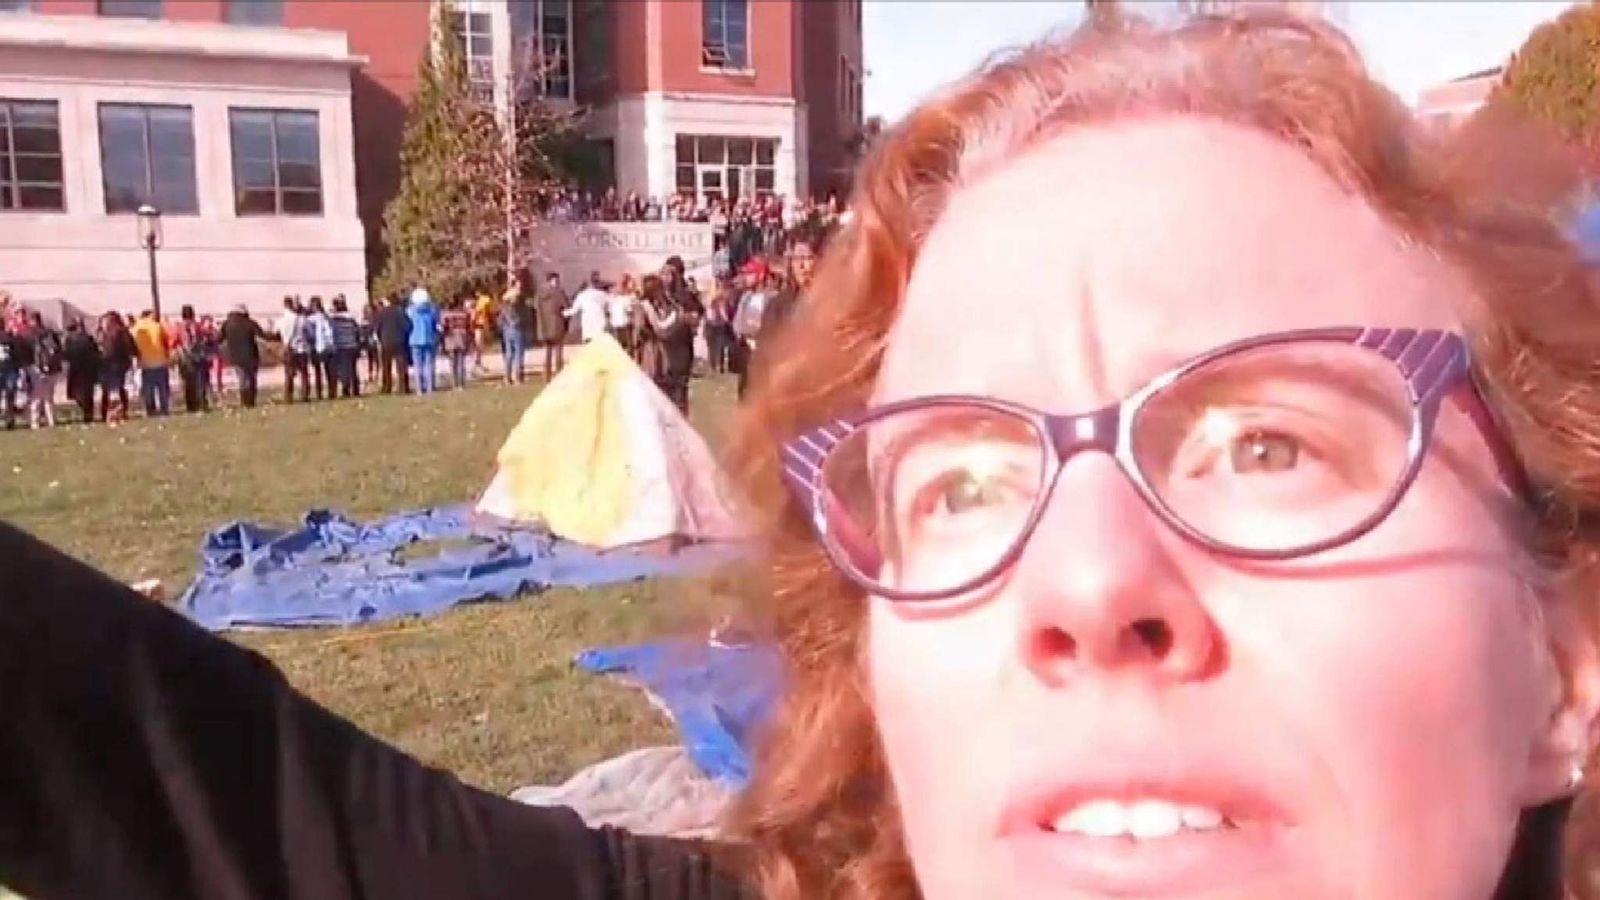 Professor In Protest Video Charged With Assault